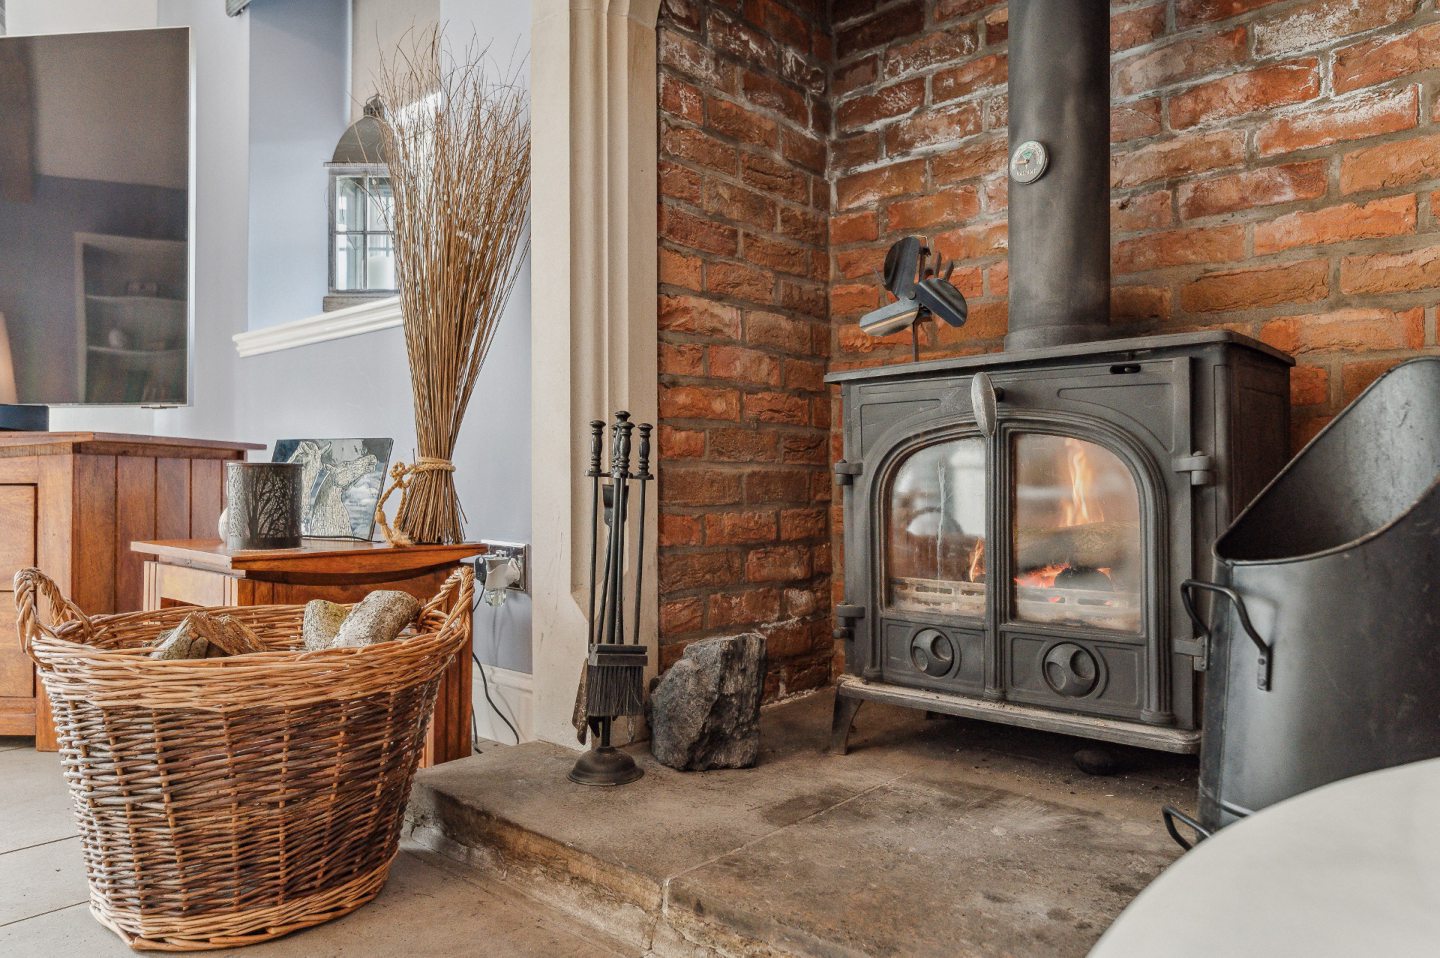 A wood burning stove in the living room